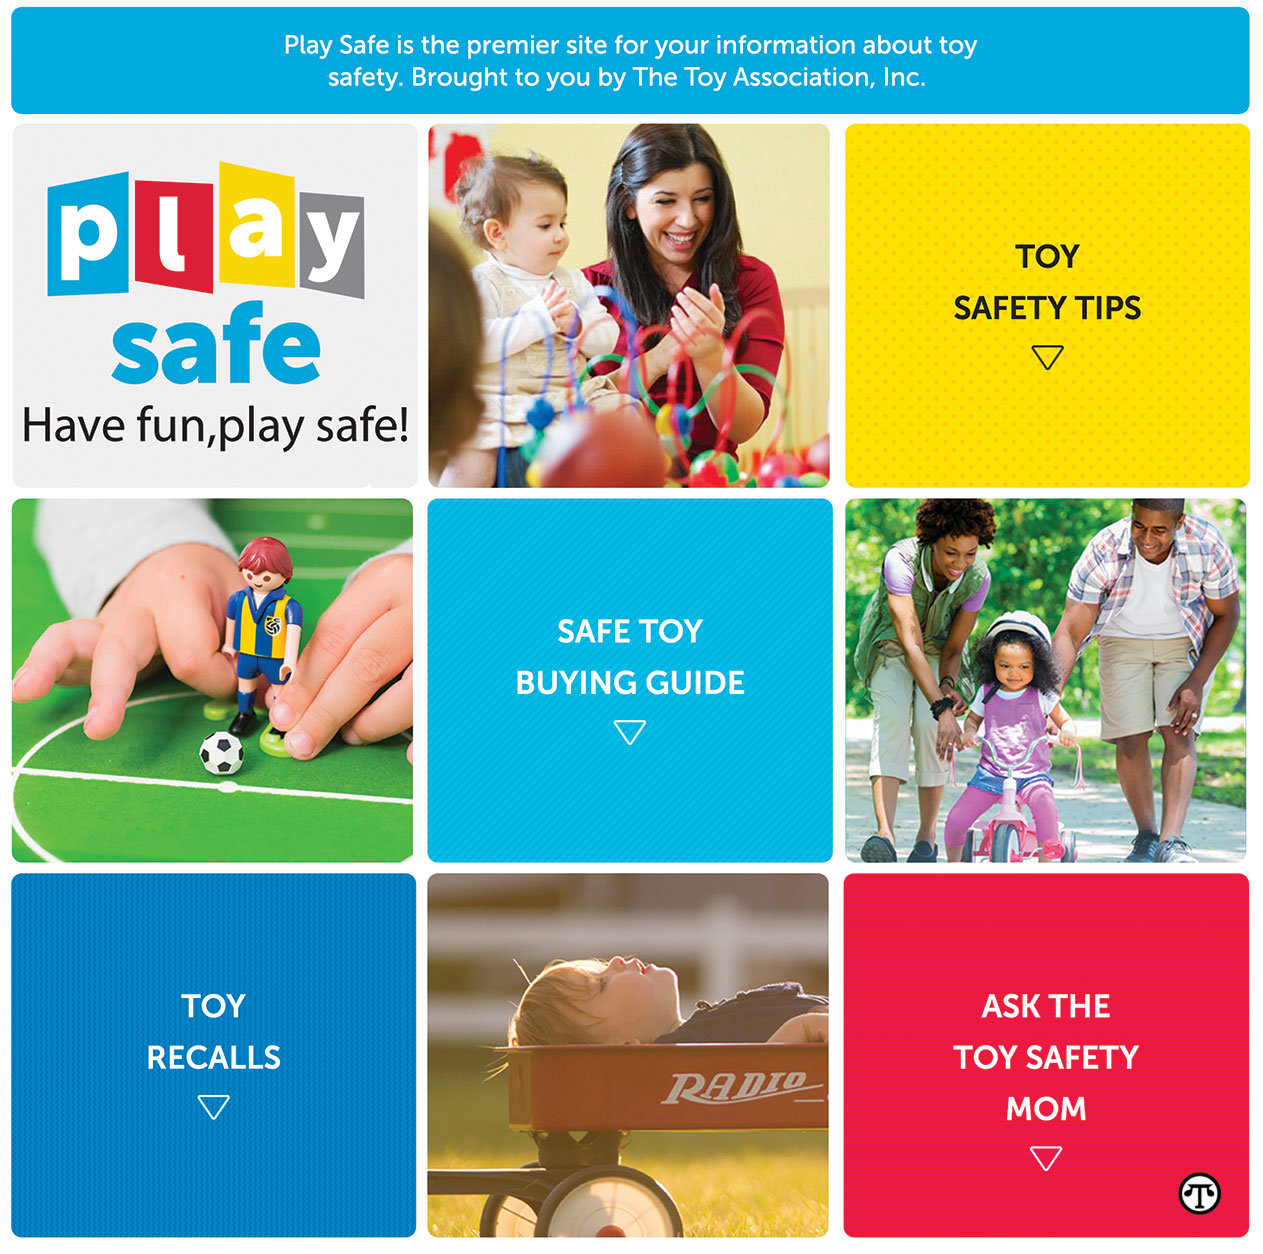 Playtime is more fun for the whole family when    parents follow some important safety tips from PlaySafe.org.